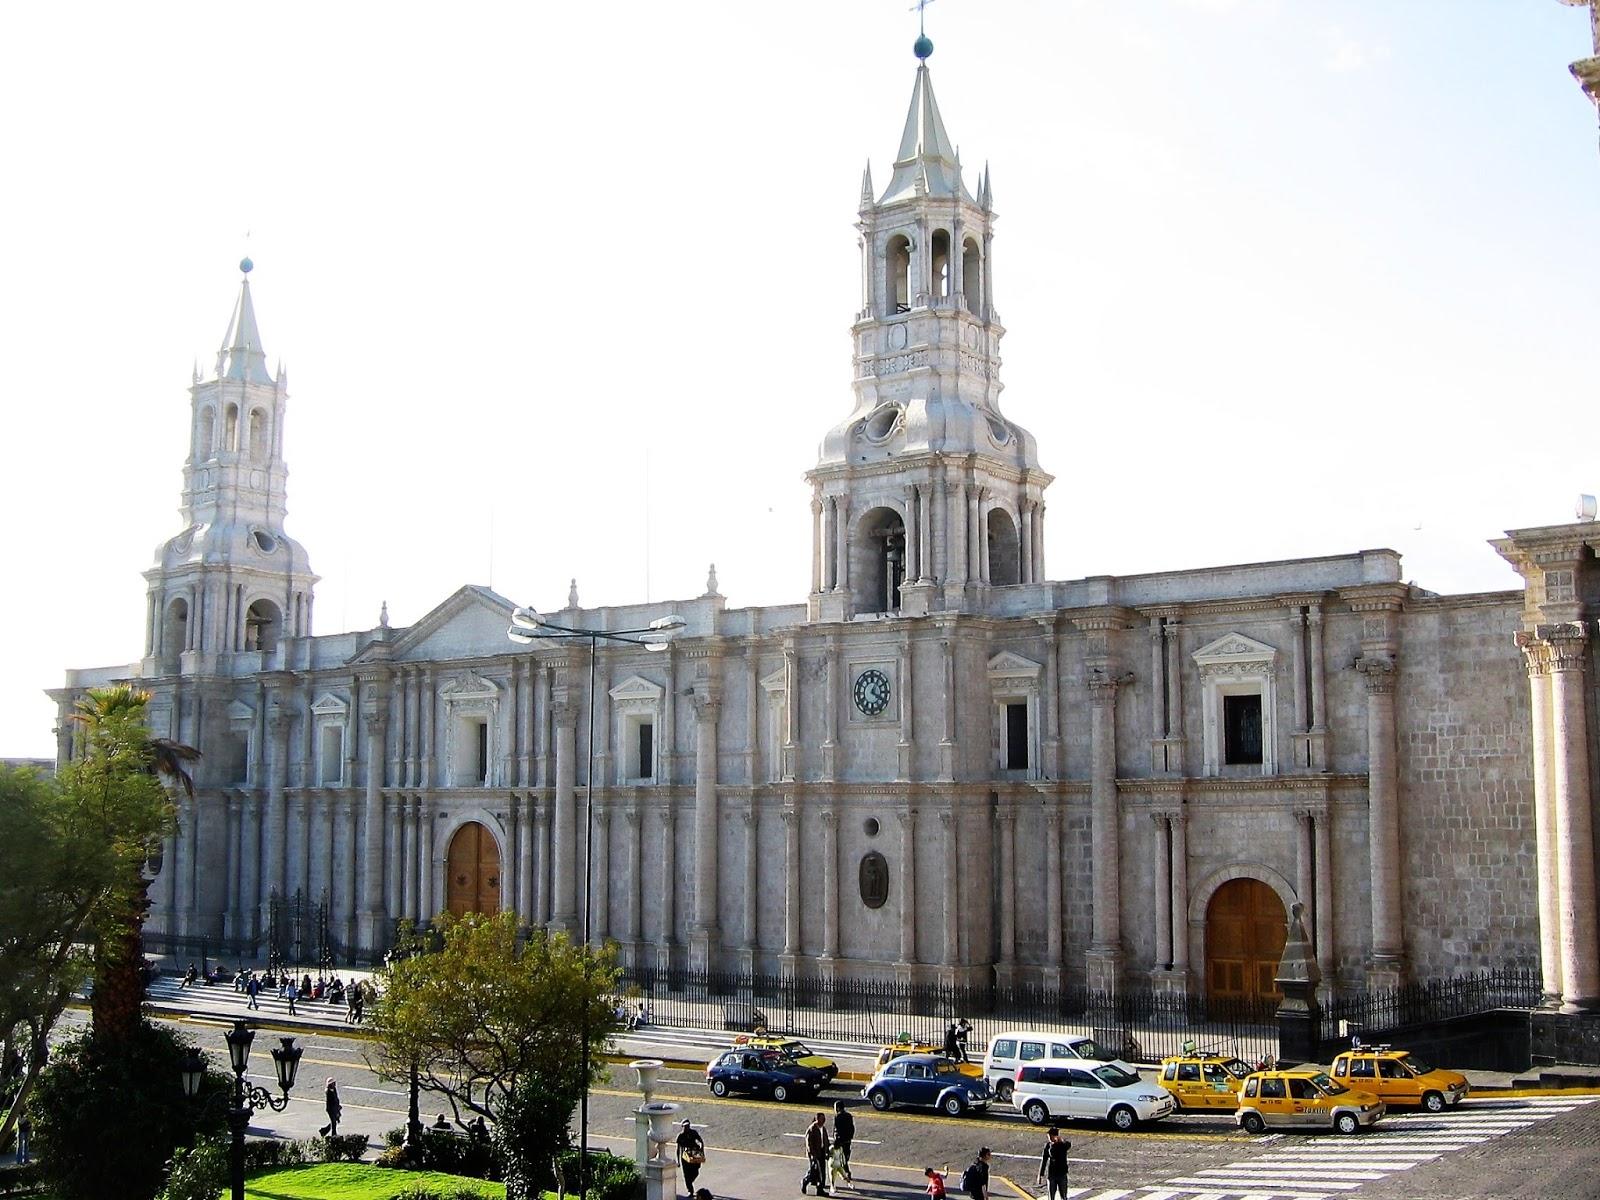 5 Five 5: Historical Centre Of The City Of Arequipa (Peru)